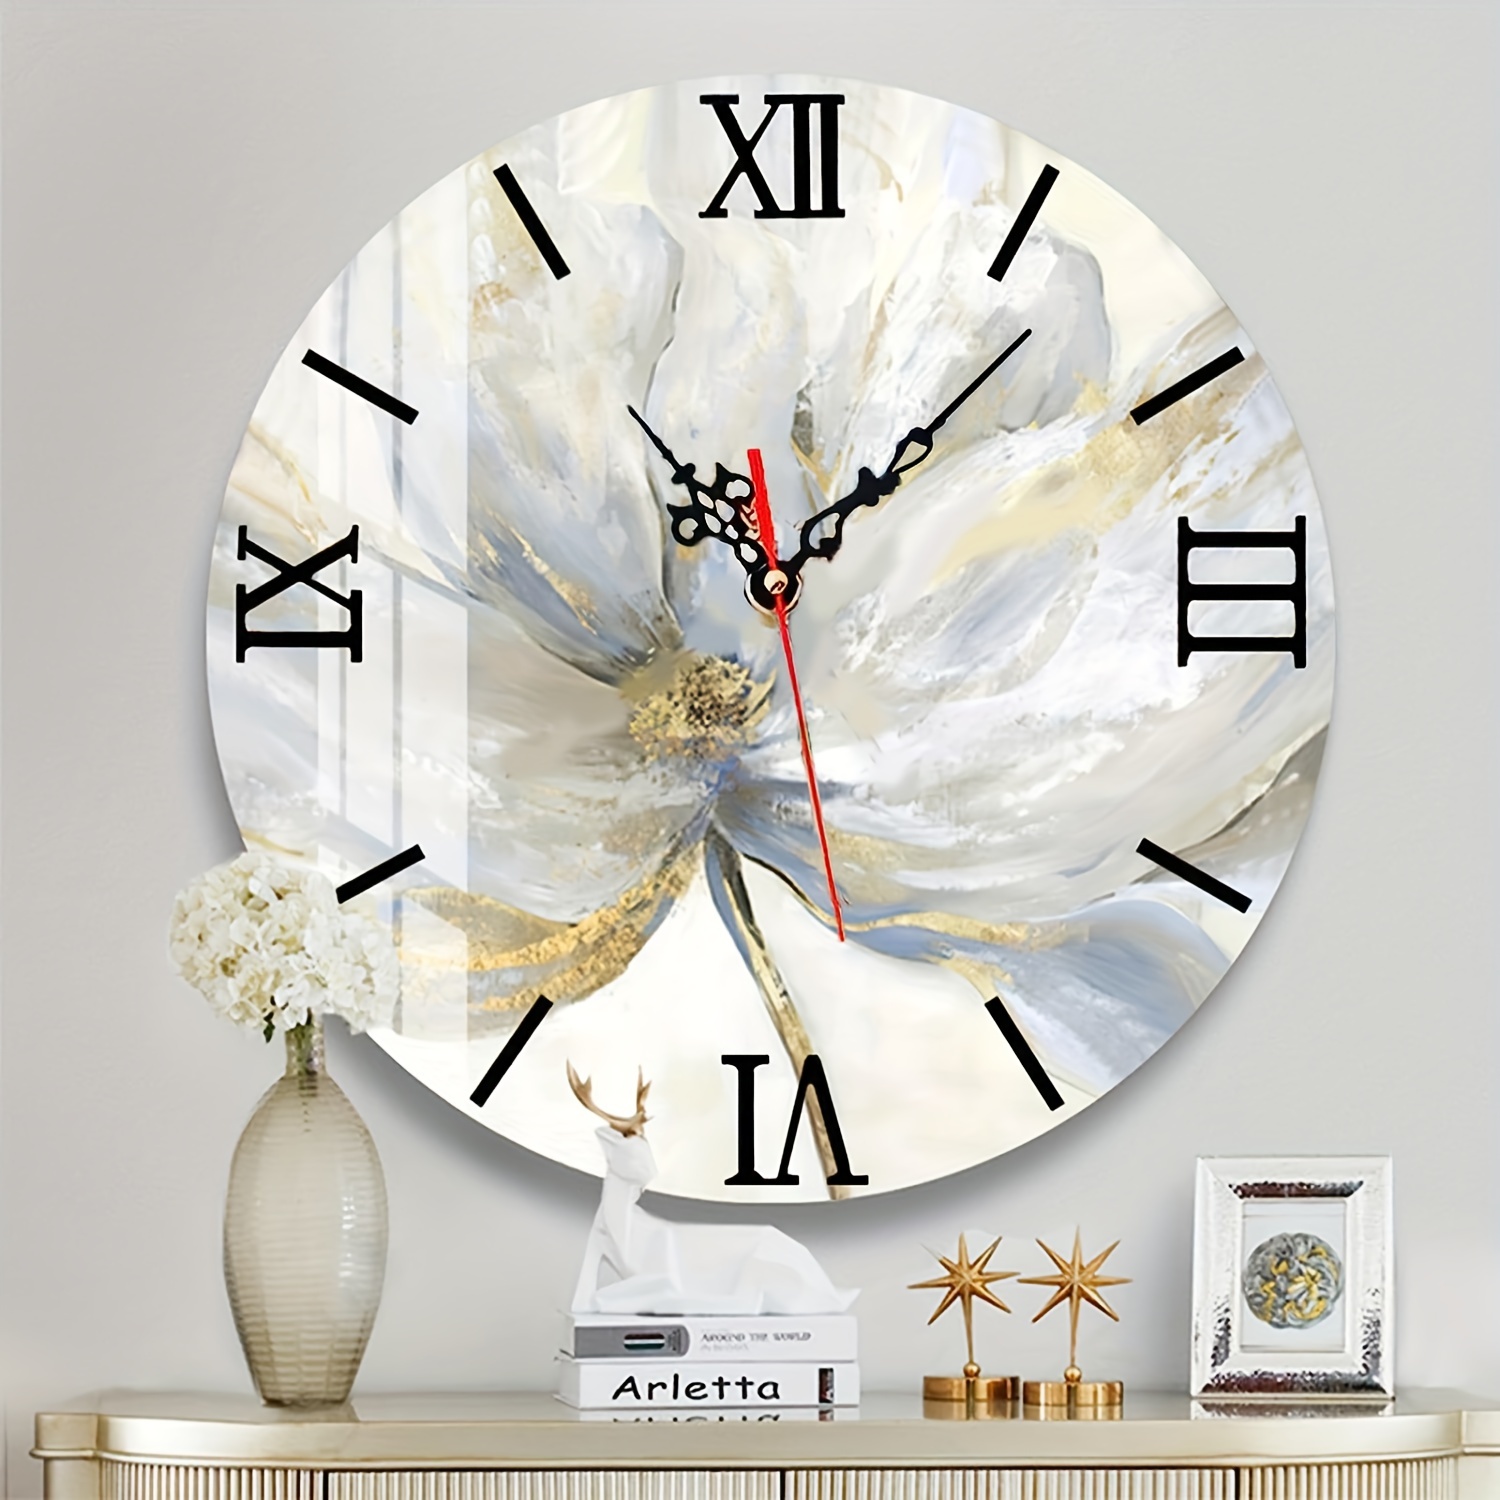 Large Round Clock Resina Epoxy Molds Silicone Wall Decor Arabic Roman Clock  Dial Room Hanging Ornaments DIY Crafts Mould - AliExpress